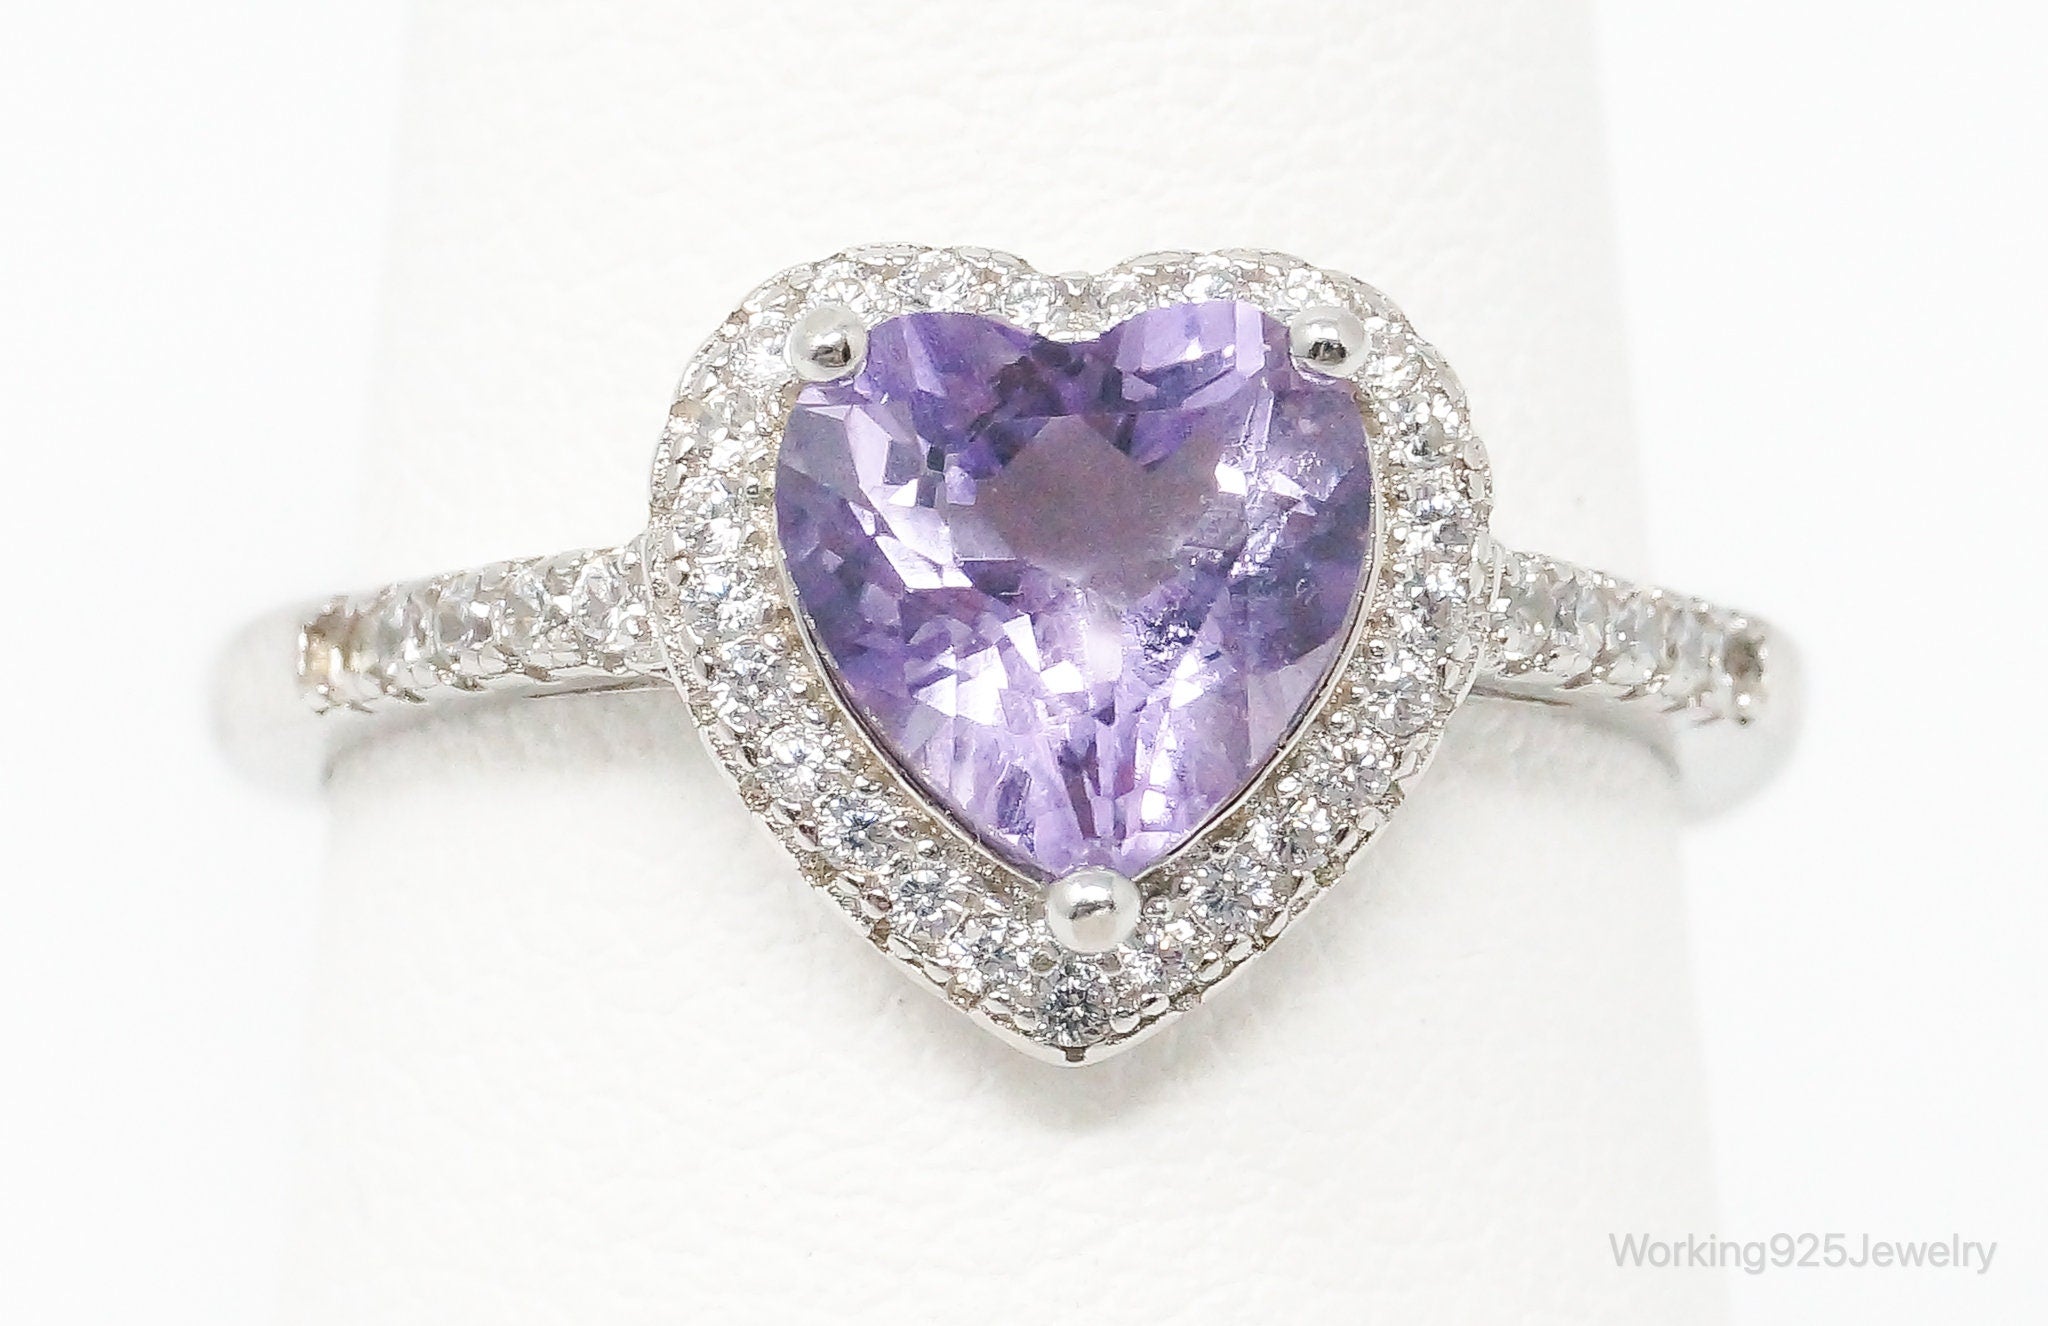 Large Amethyst Heart Cubic Zirconia Sterling Silver Ring - Size 7.25 Adjustable